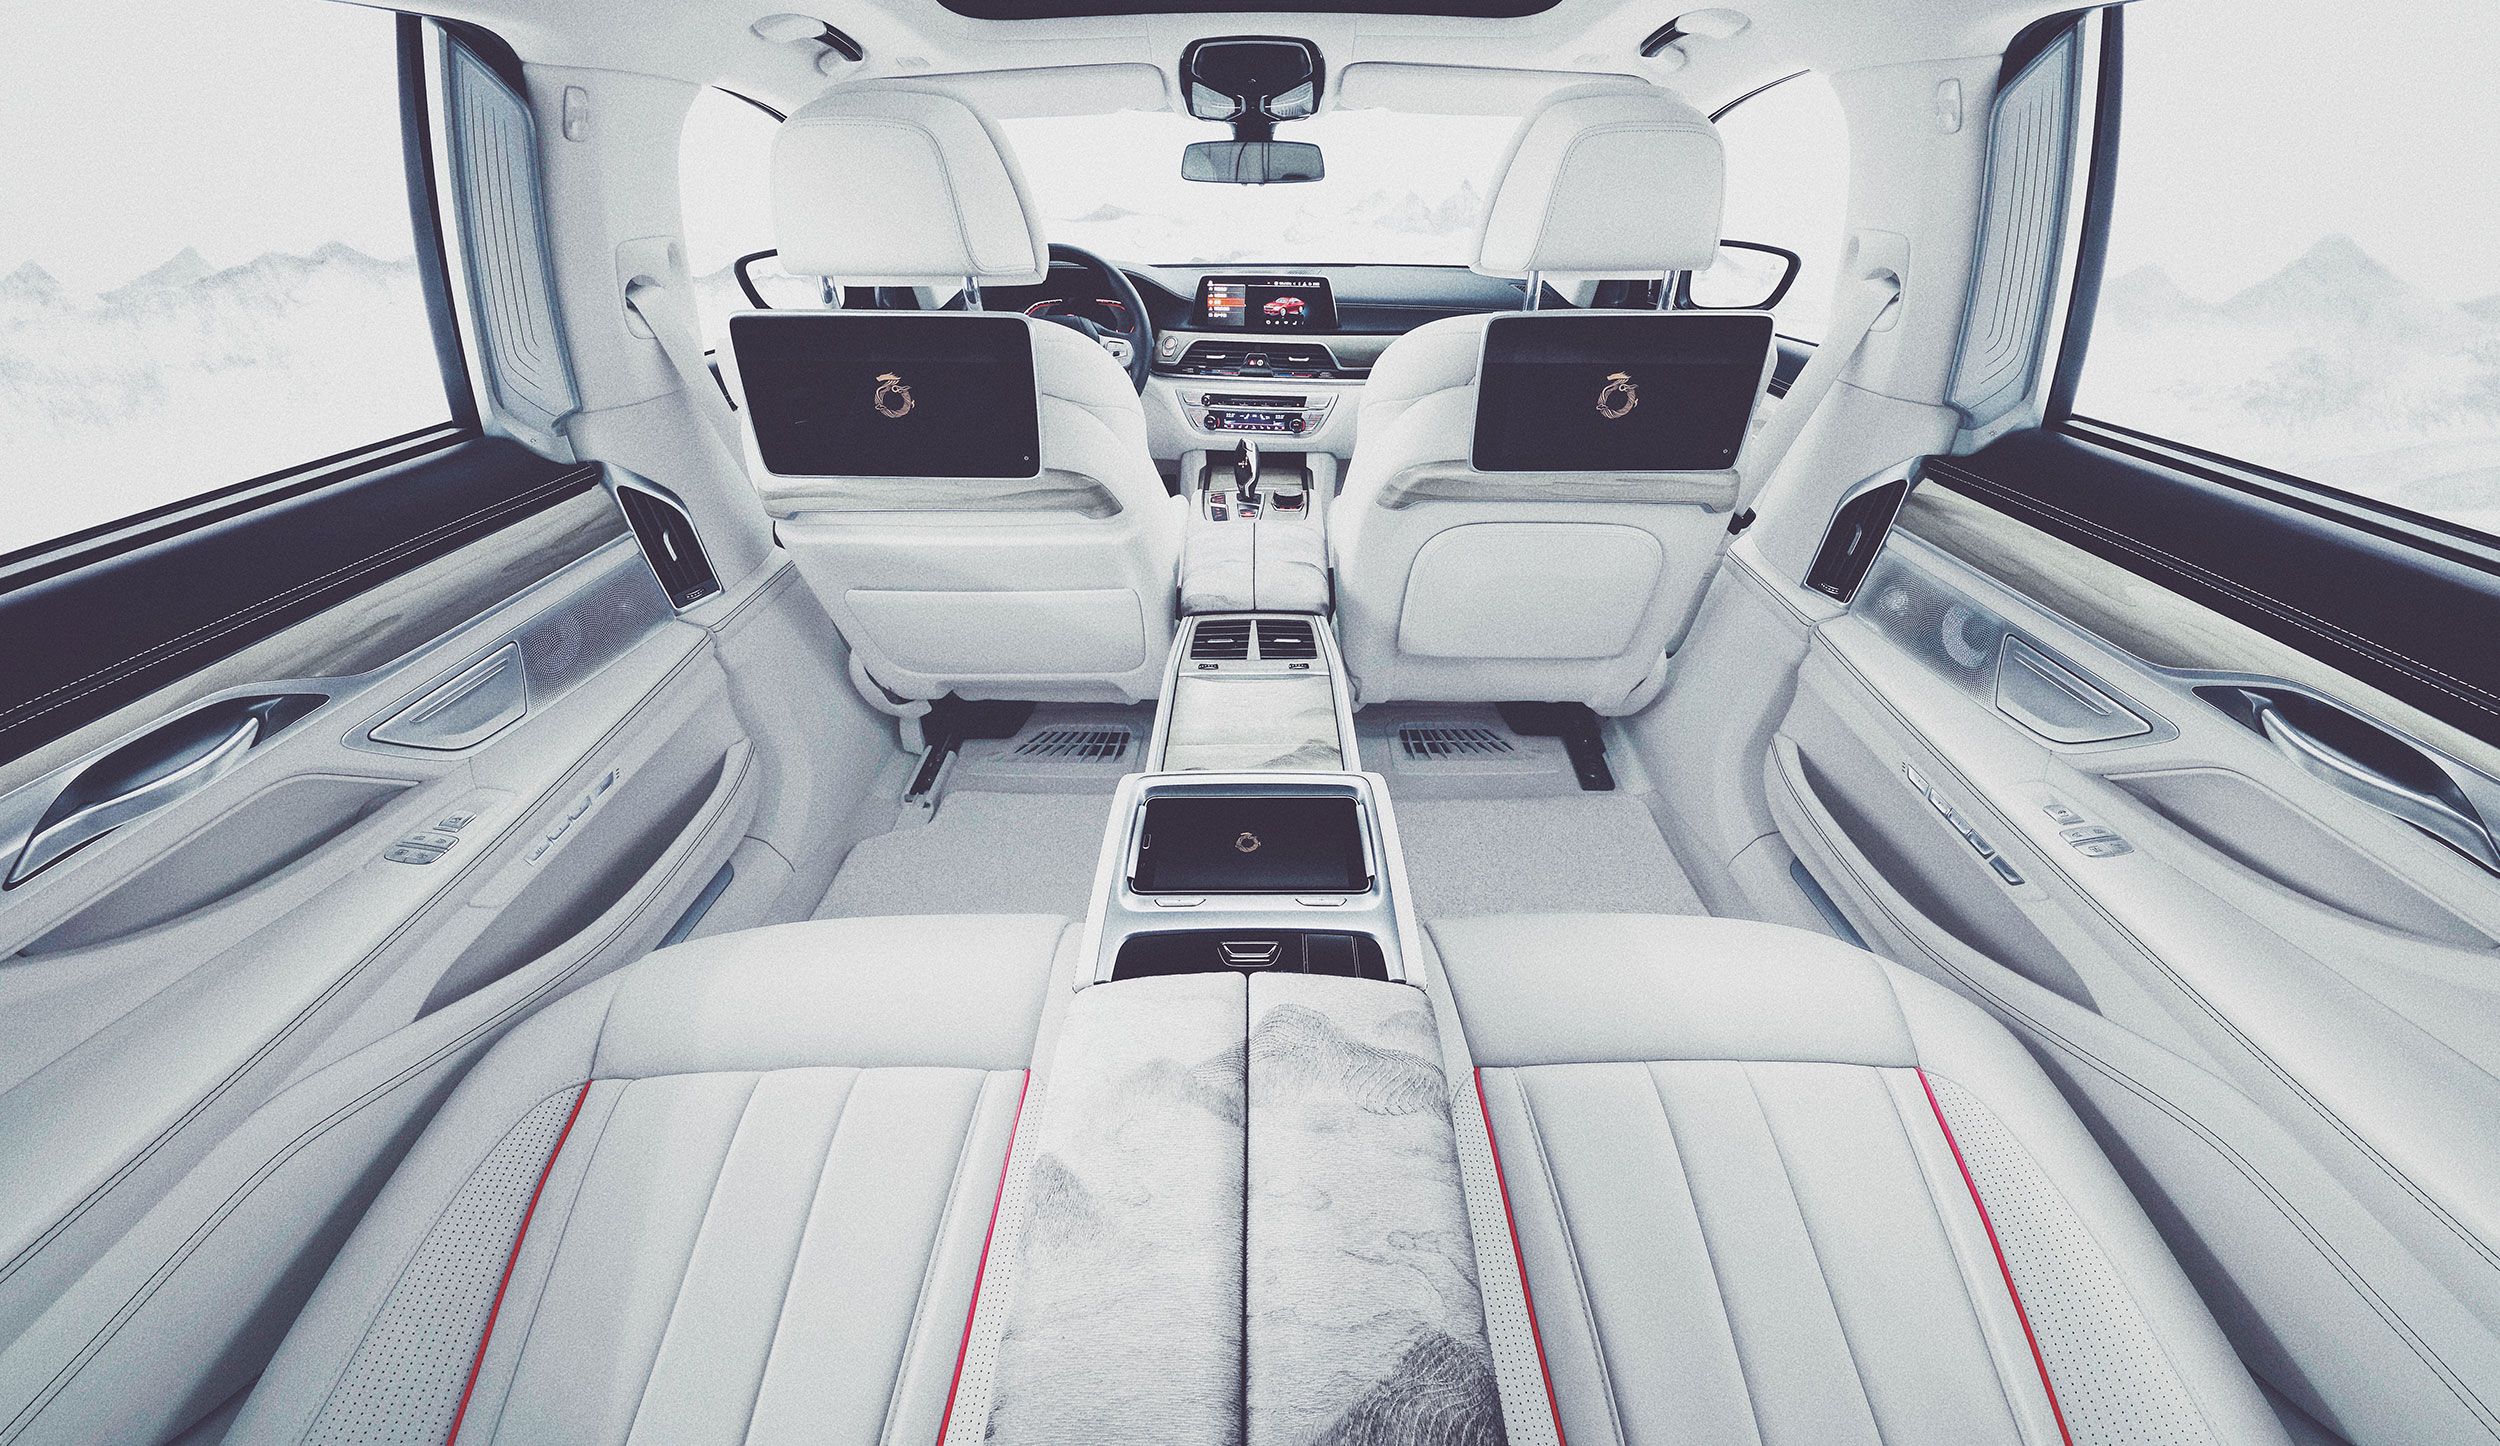 Interior view of the BMW 7 series China edition.